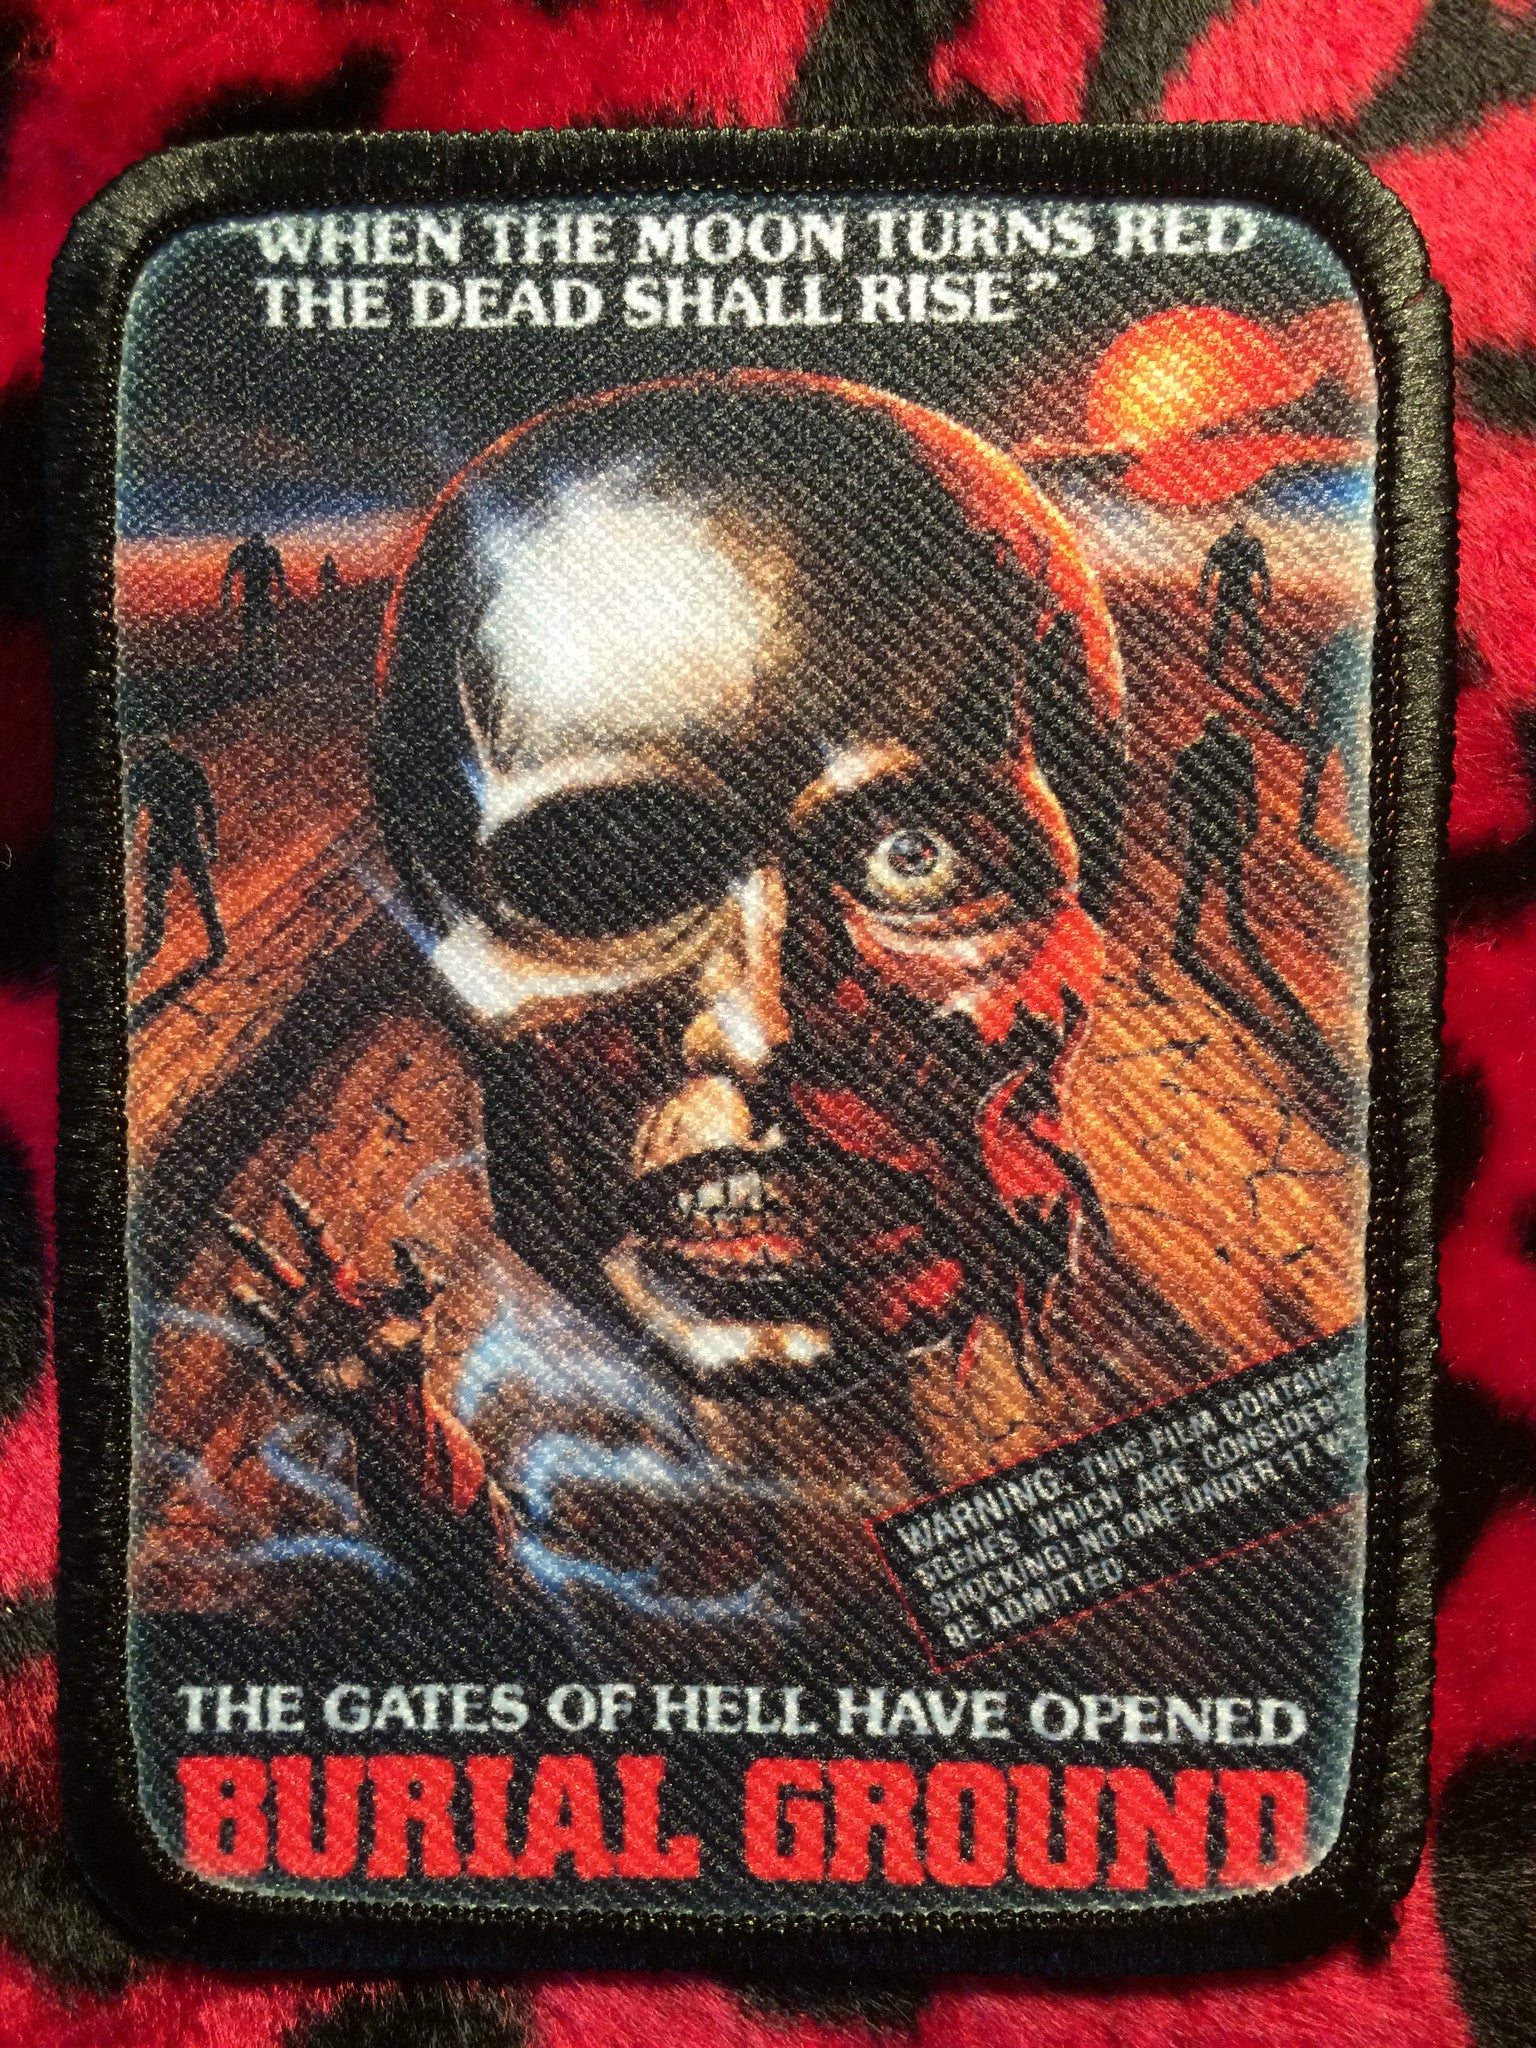 Burial Ground Patch